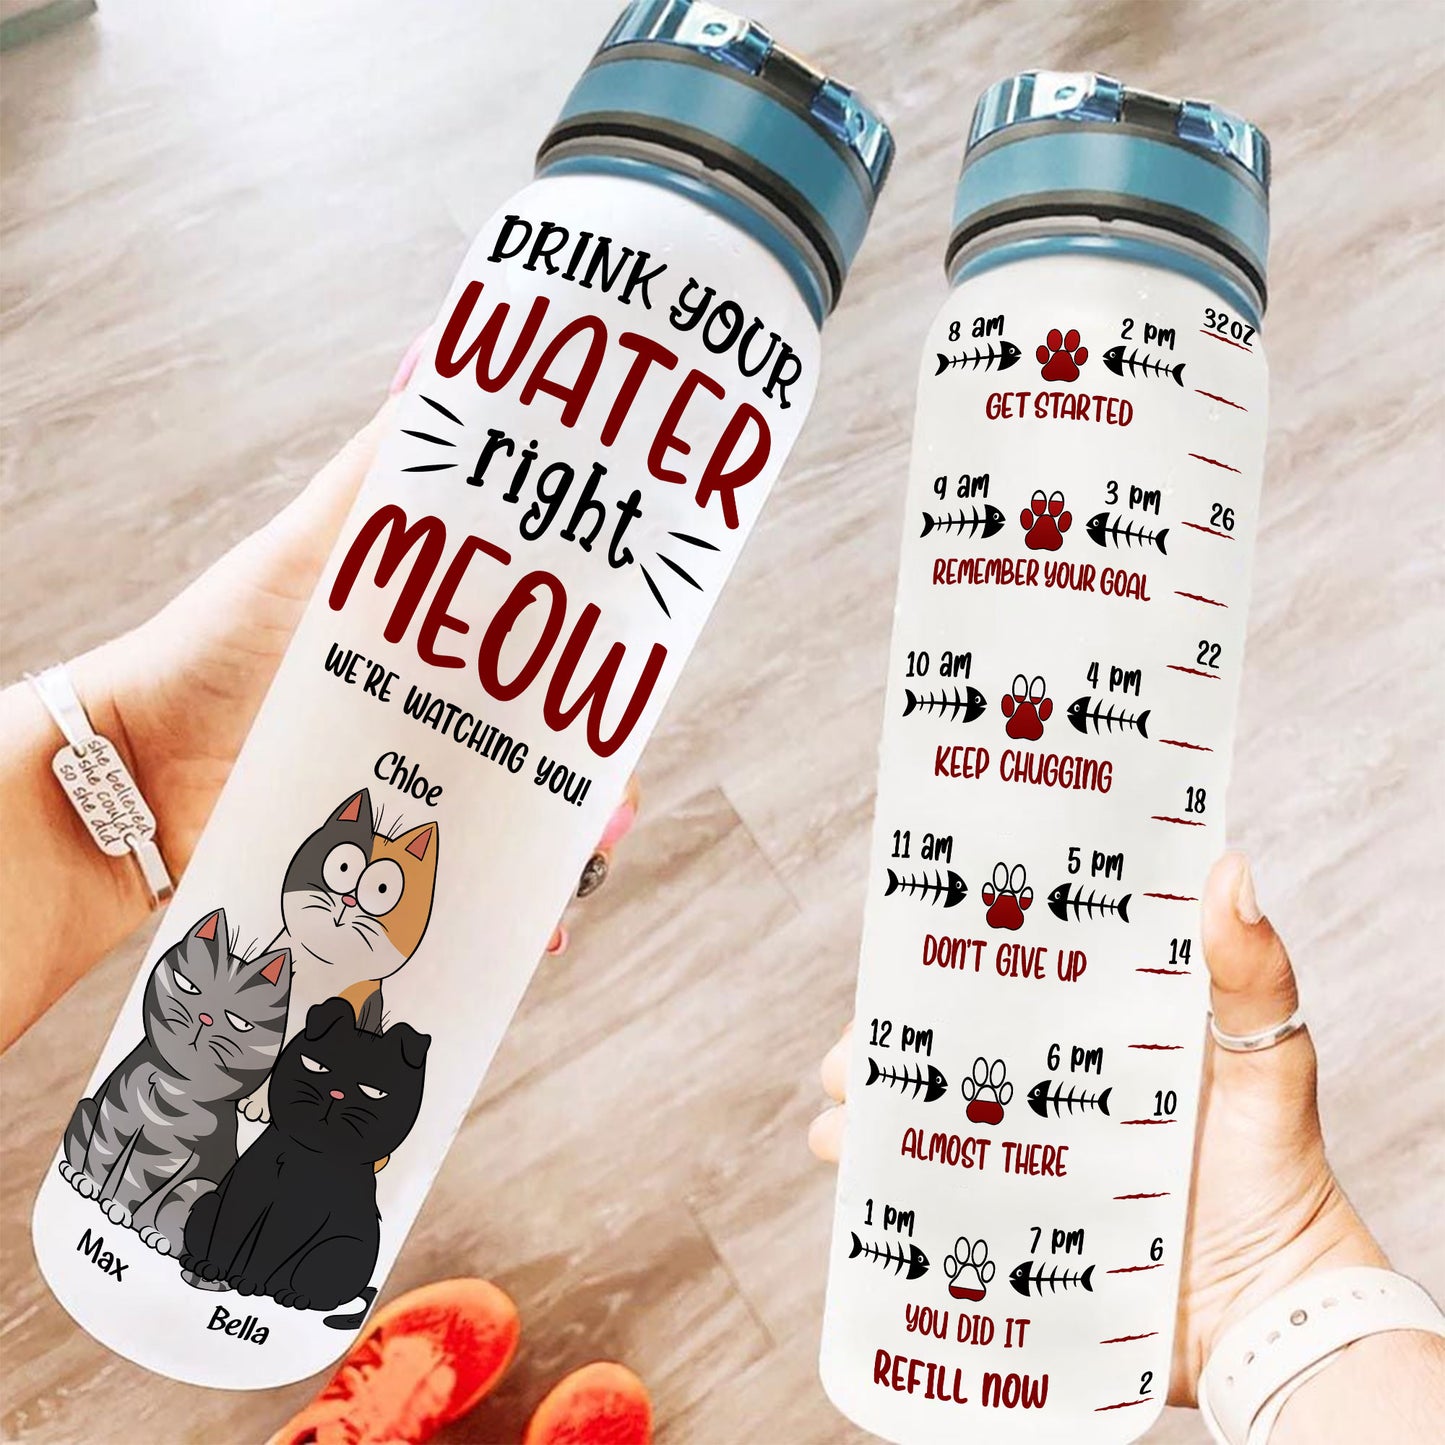 Drink Your Water Right Meow - Personalized Water Bottle With Time Marker